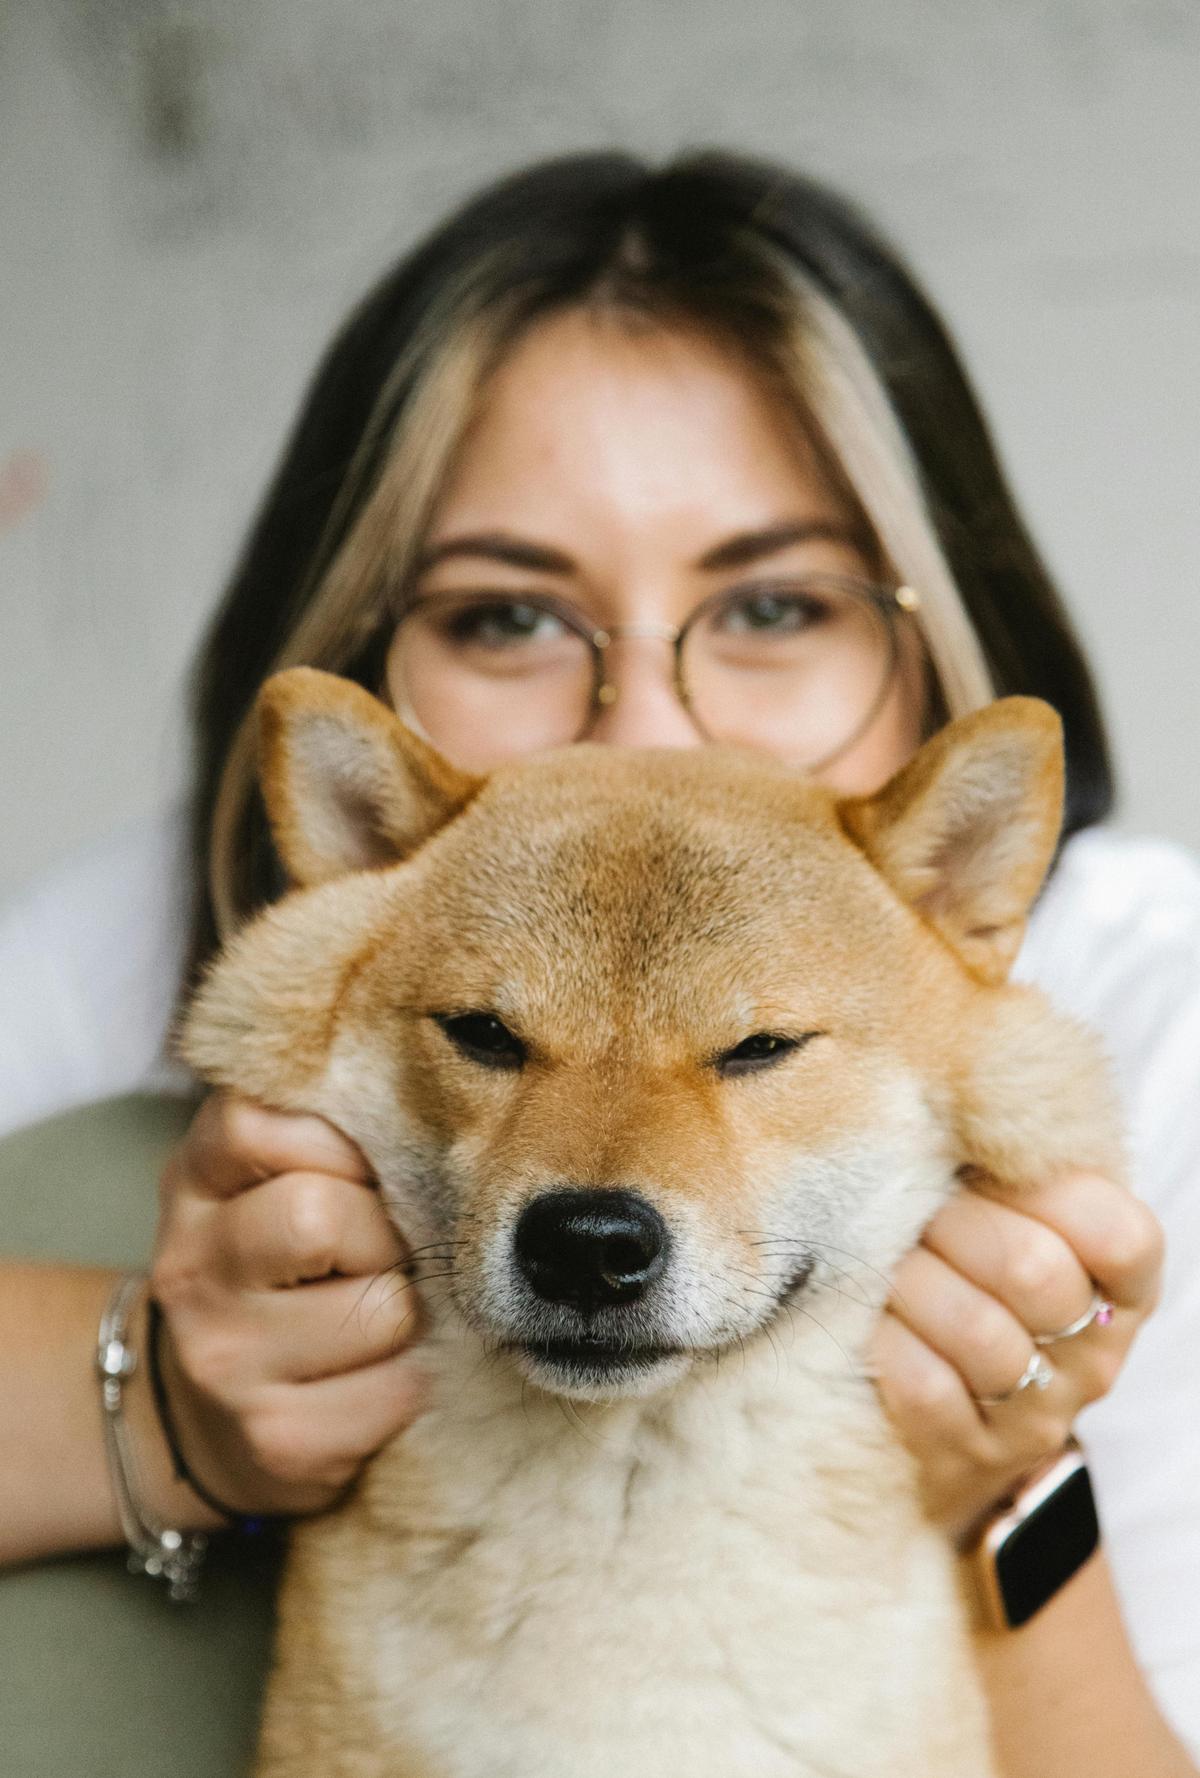 Create a strong bond with your dog so that you can be their safety net. (Meruyert Gonullu/Pexels)